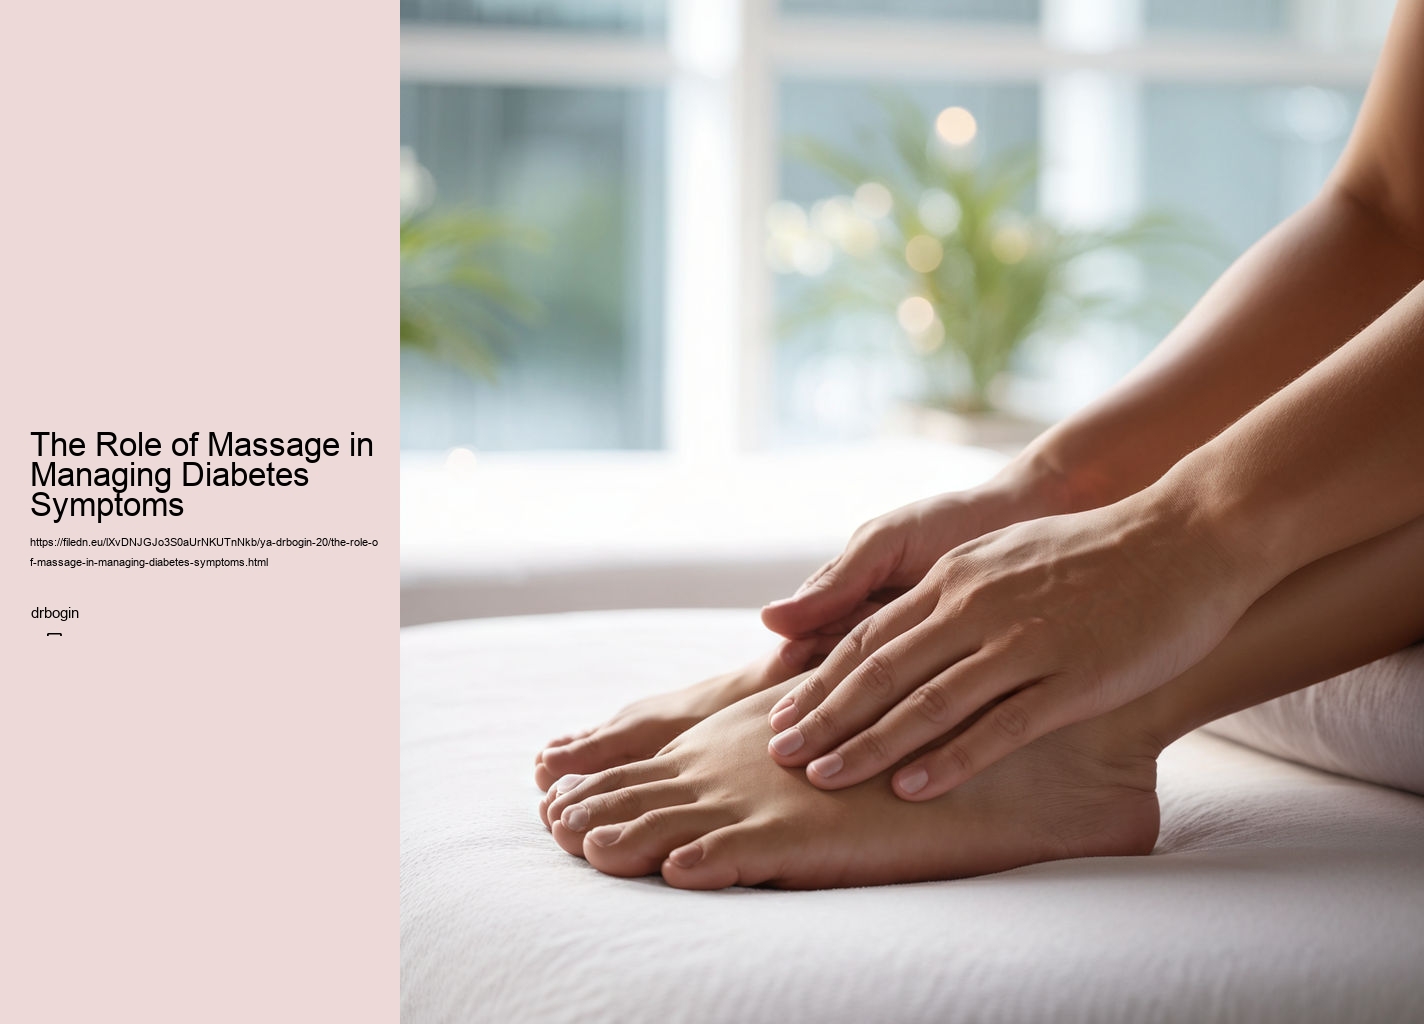 The Role of Massage in Managing Diabetes Symptoms